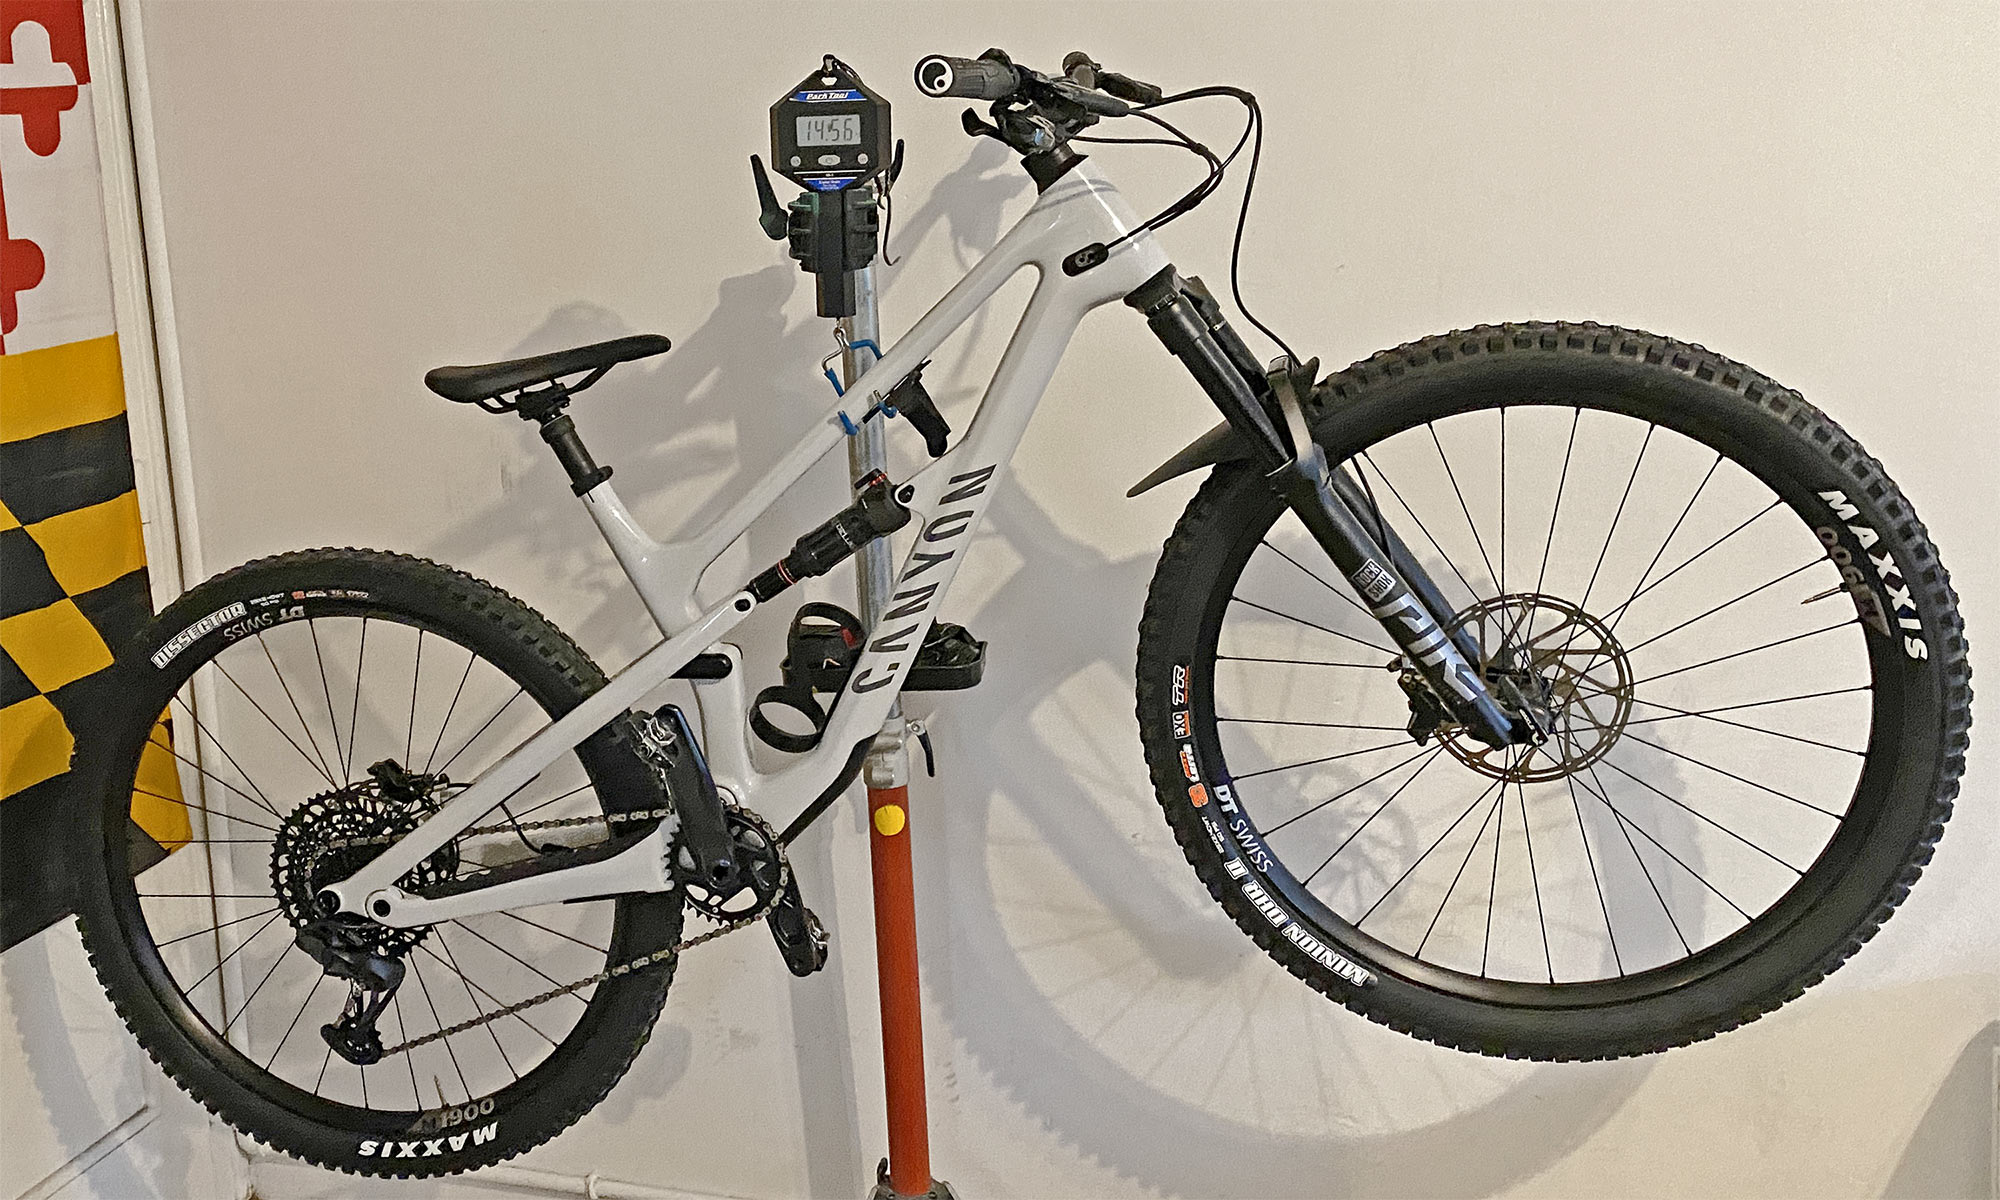 Canyon Spectral 125mm MTB review, playful rowdy carbon short-travel enduro all-mountain bike, ready-to-ride 14.5kg actual weight